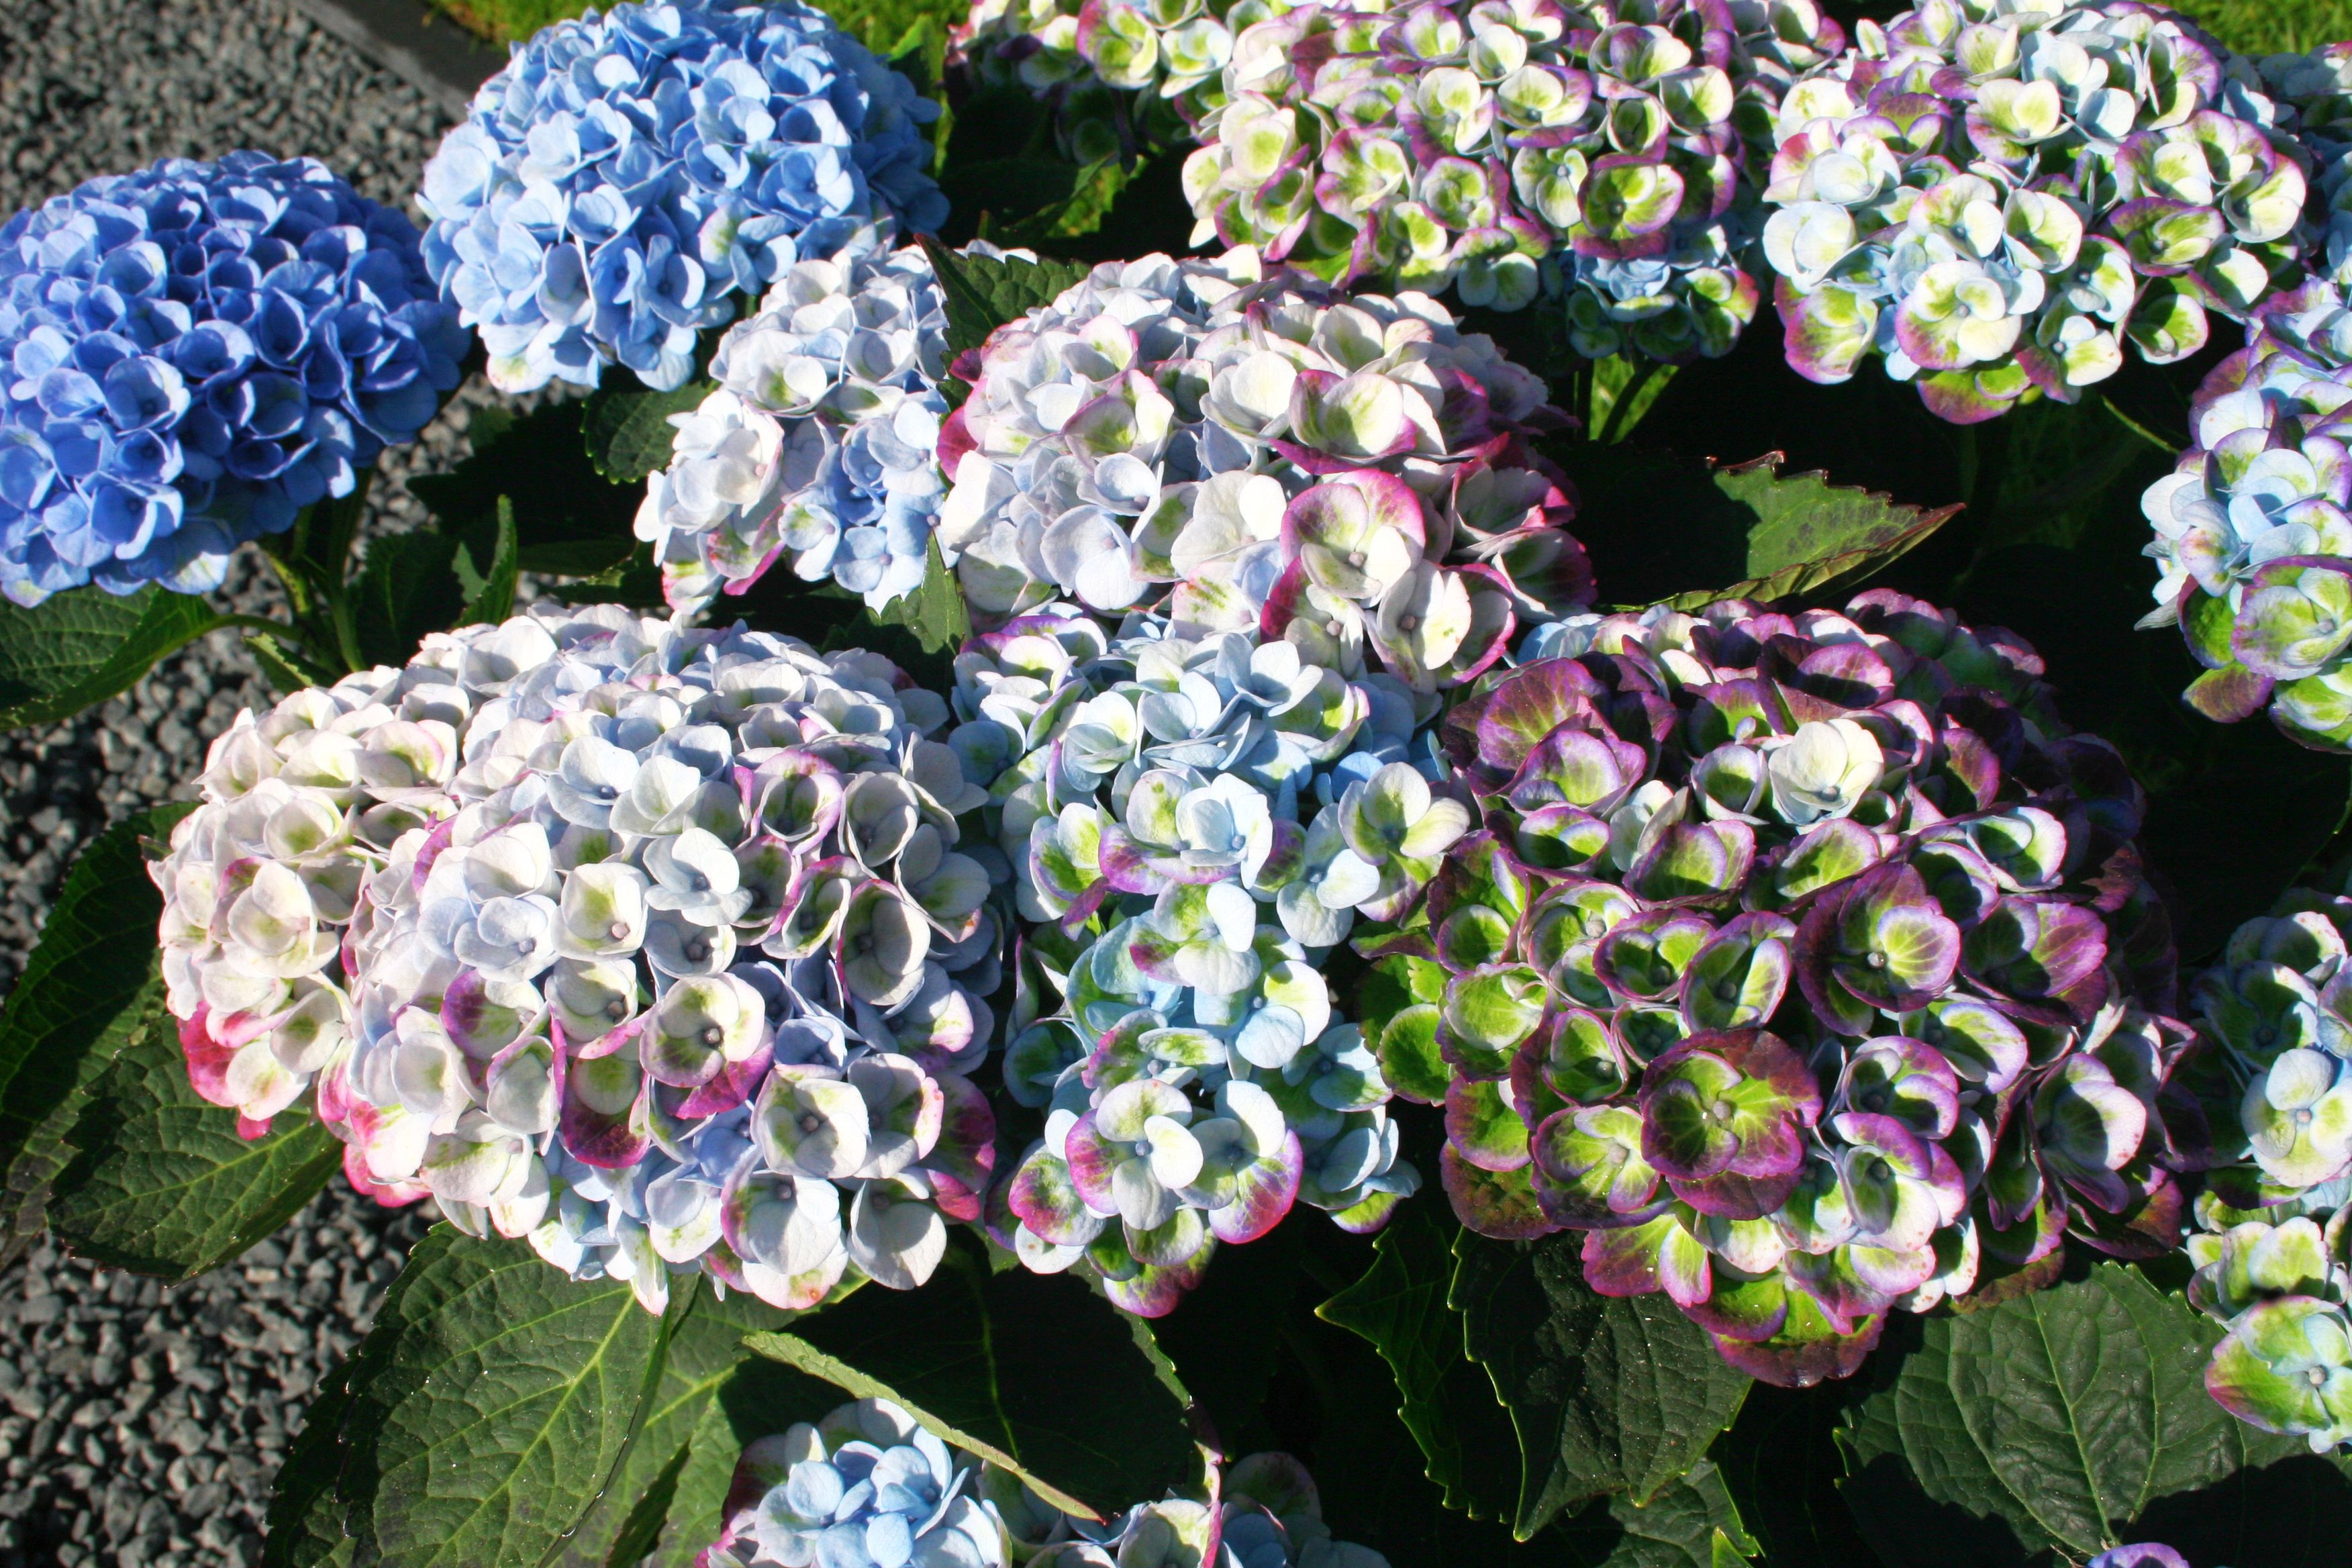 images/plants/hydrangea/hyd-magical-everlasting-revolution/hyd-magical-everlasting-revolution-0086.jpg